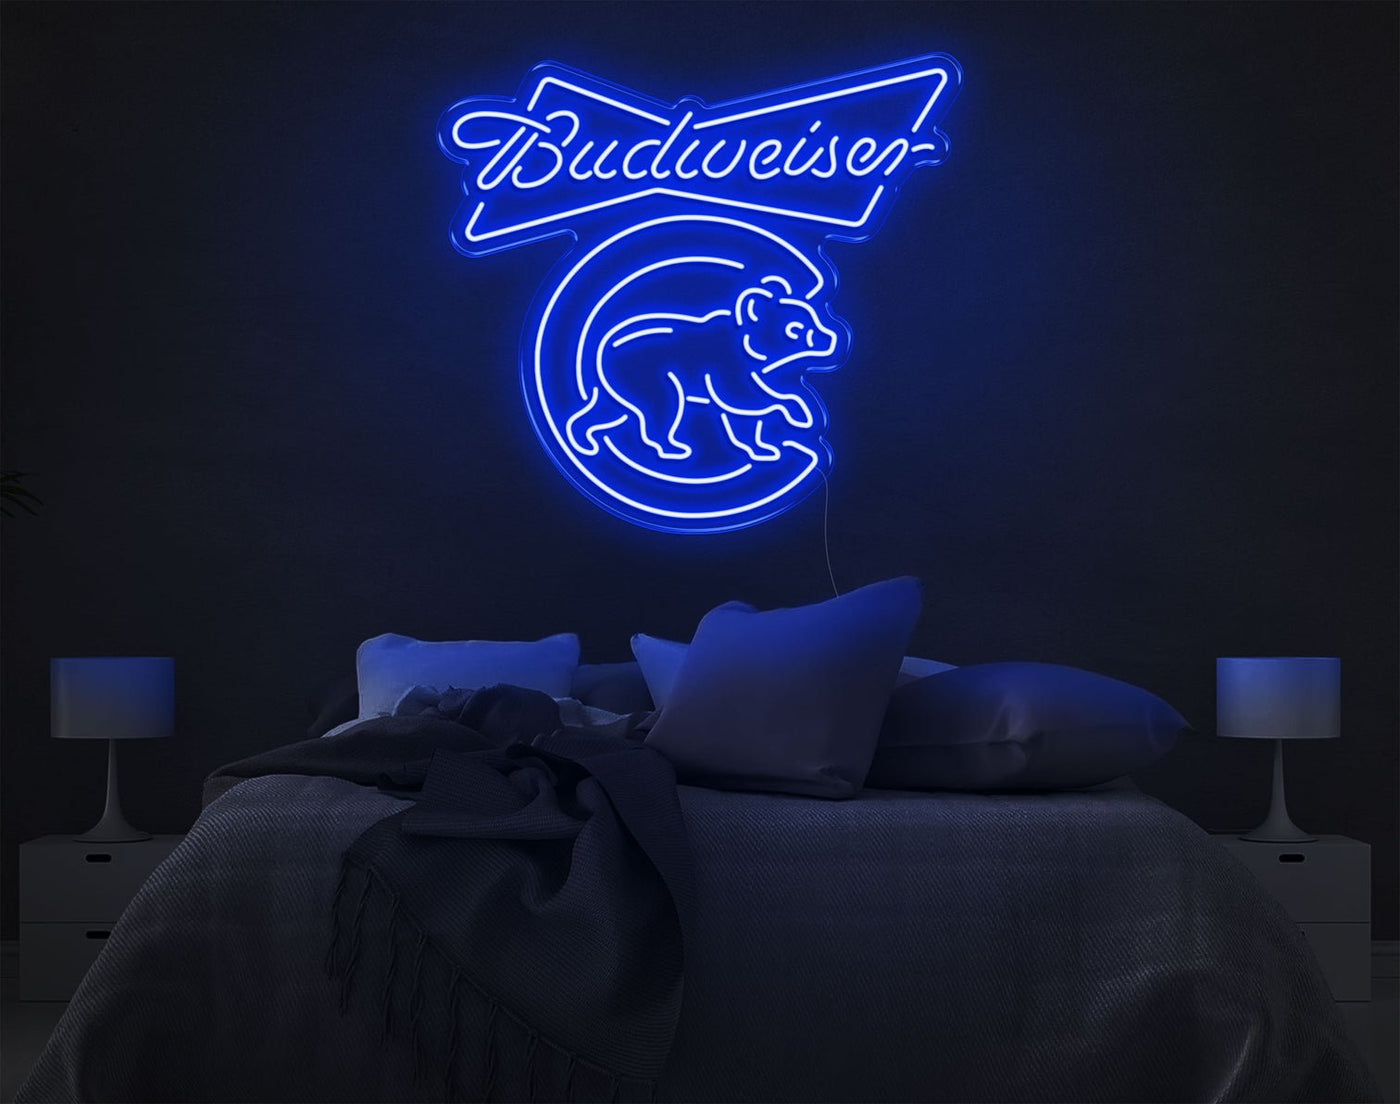 Budweiser LED Neon Sign - 25inch x 28inchBlue